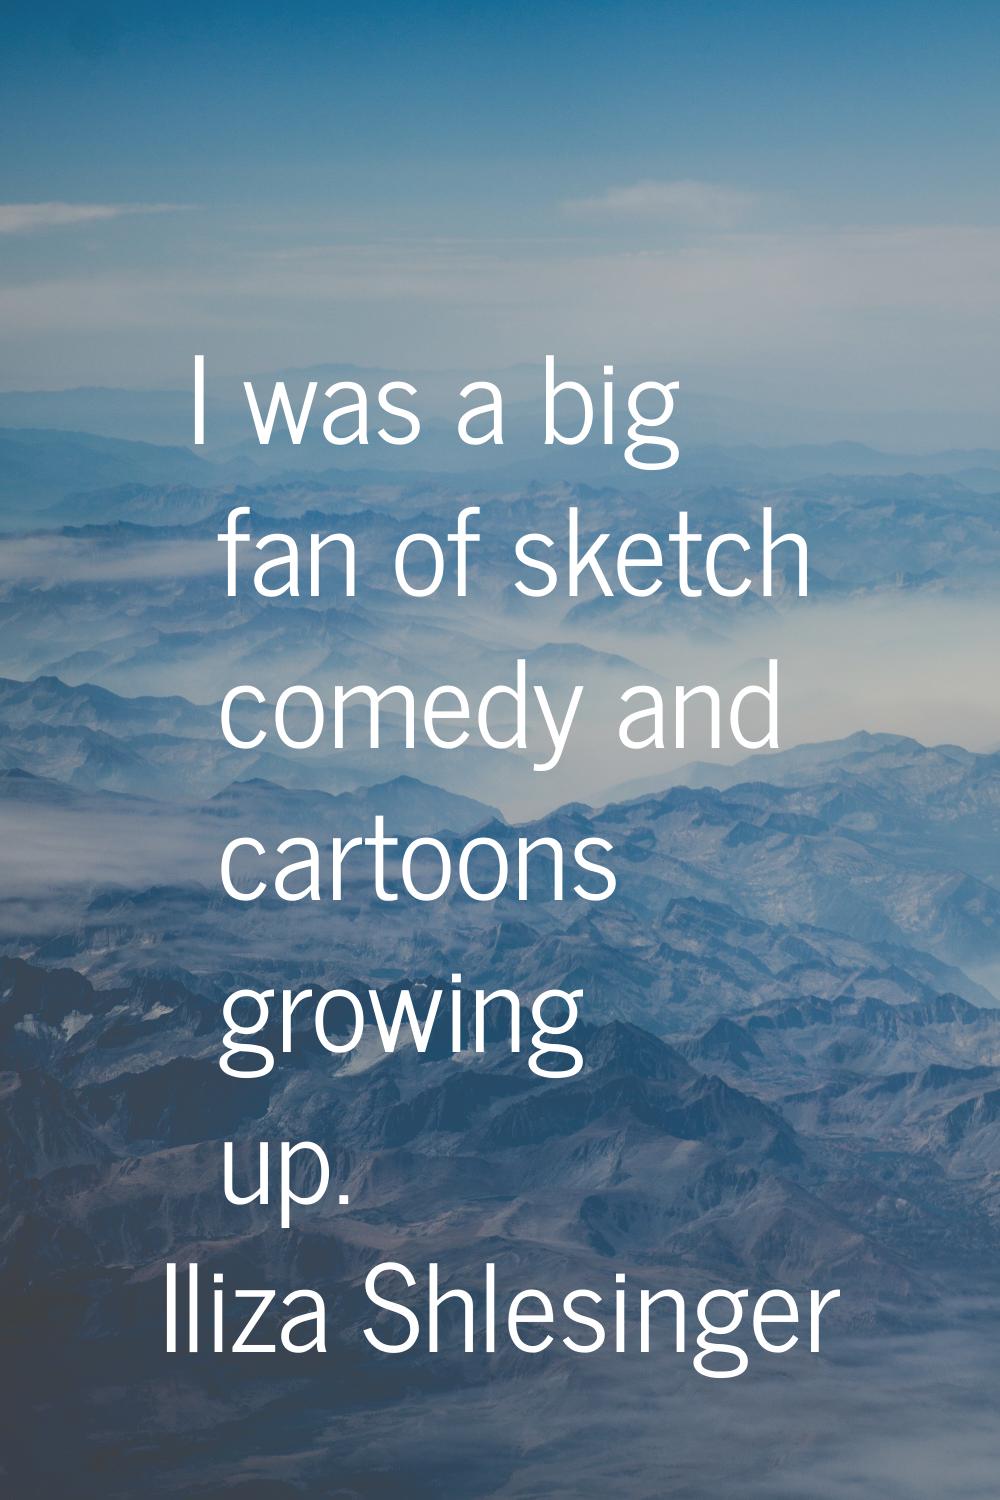 I was a big fan of sketch comedy and cartoons growing up.